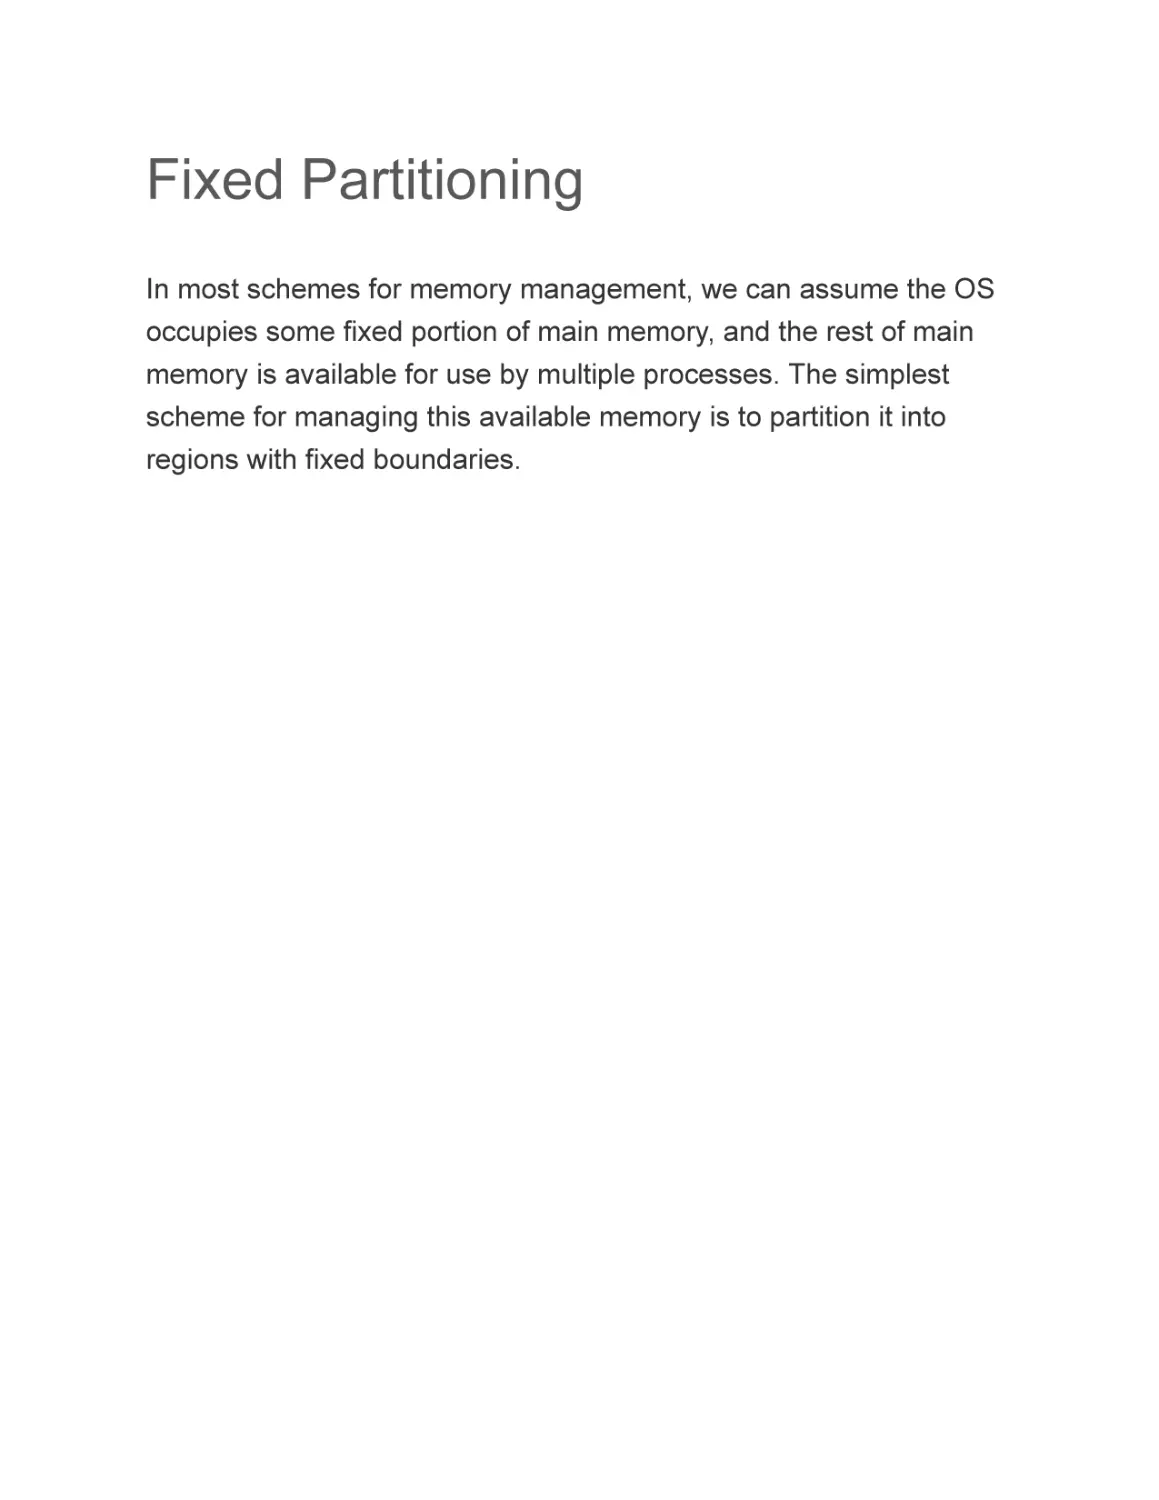 Fixed Partitioning